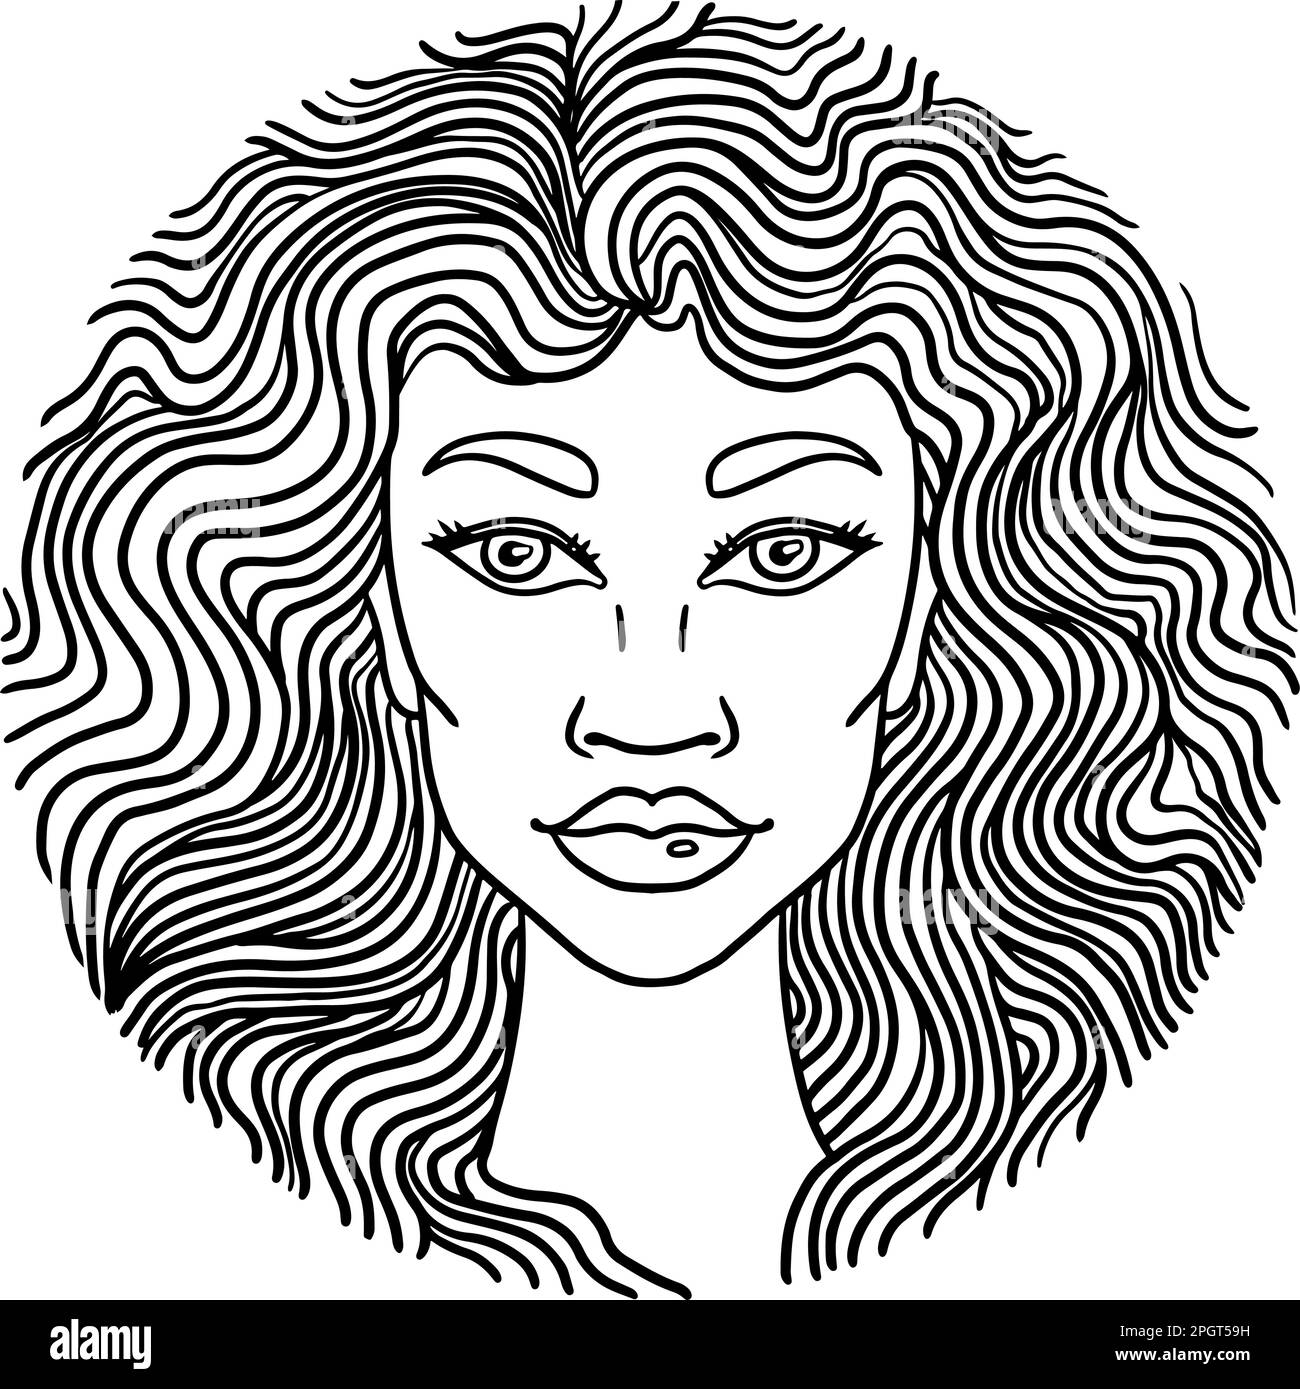 Hand Drawn Doodle Girl in Round Frame. Stock Vector